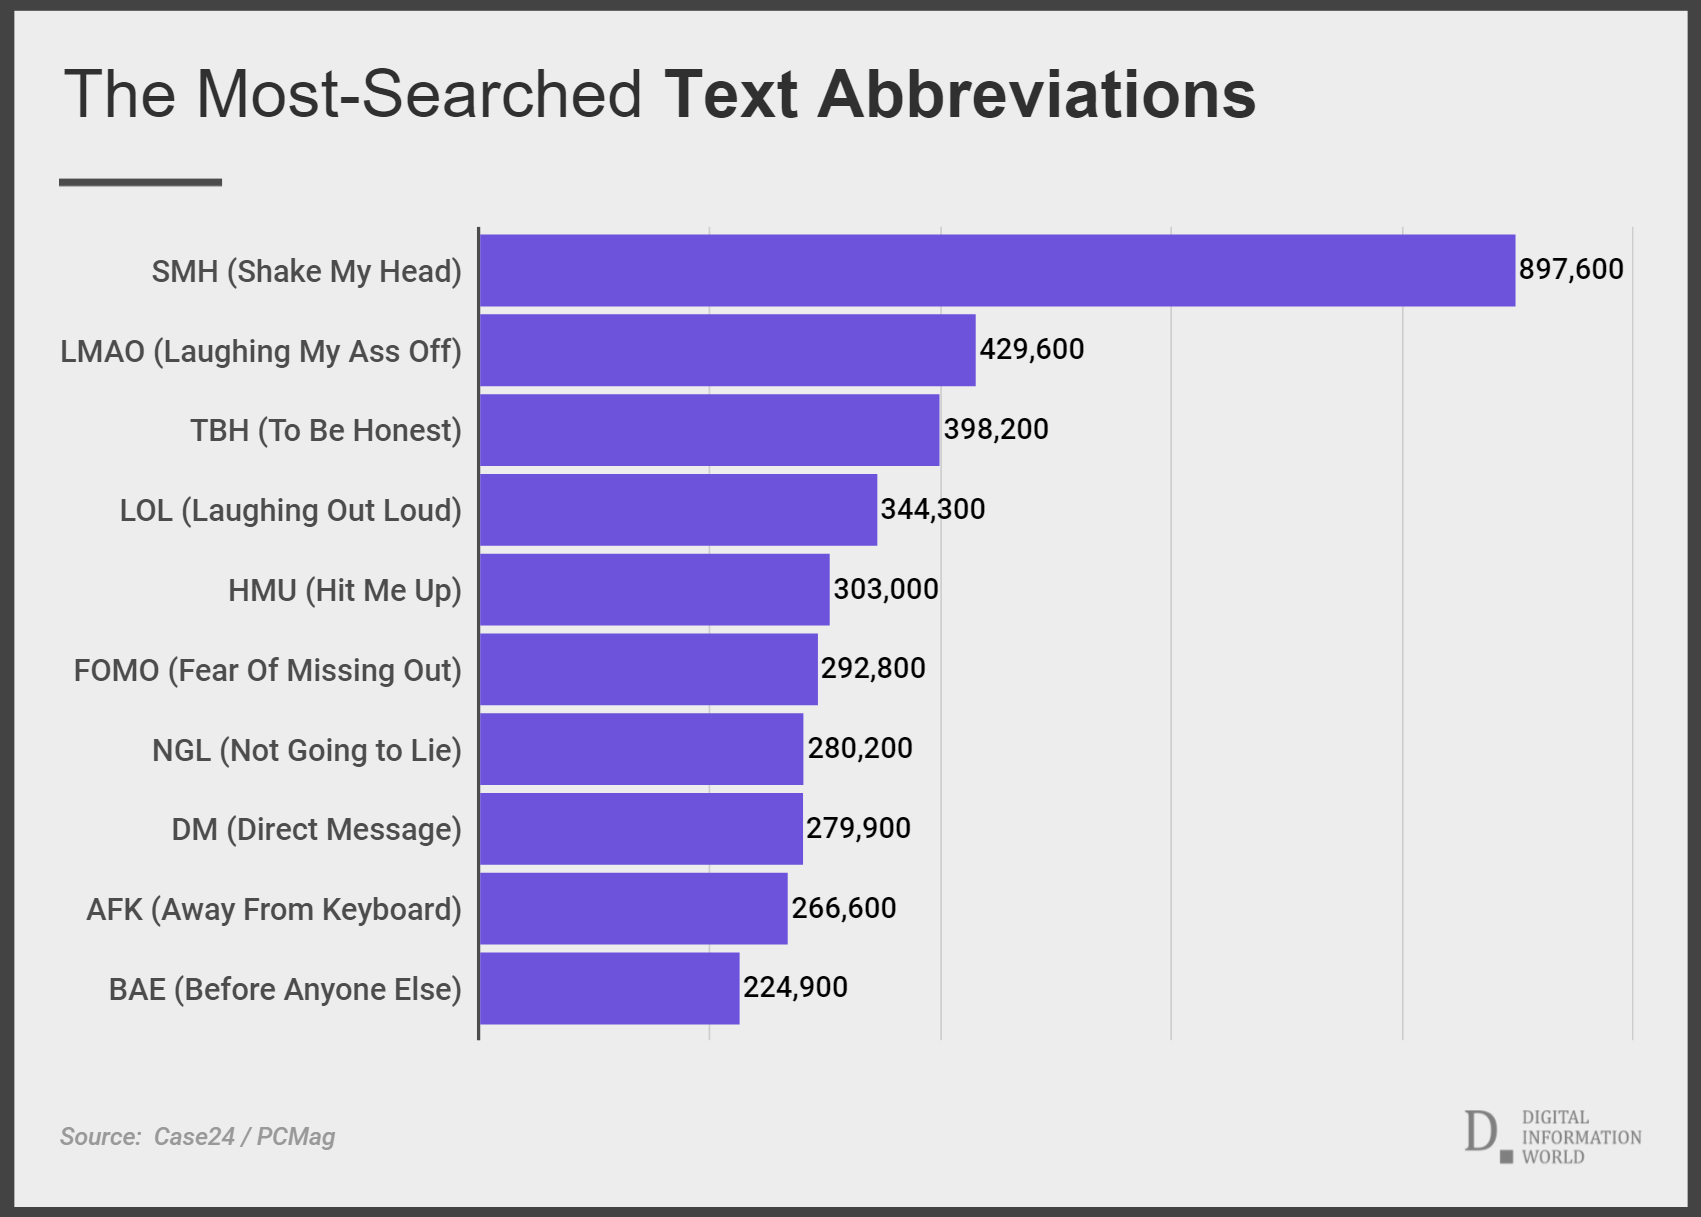 The Most-Searched Text Abbreviations Make Me SMH, NGL